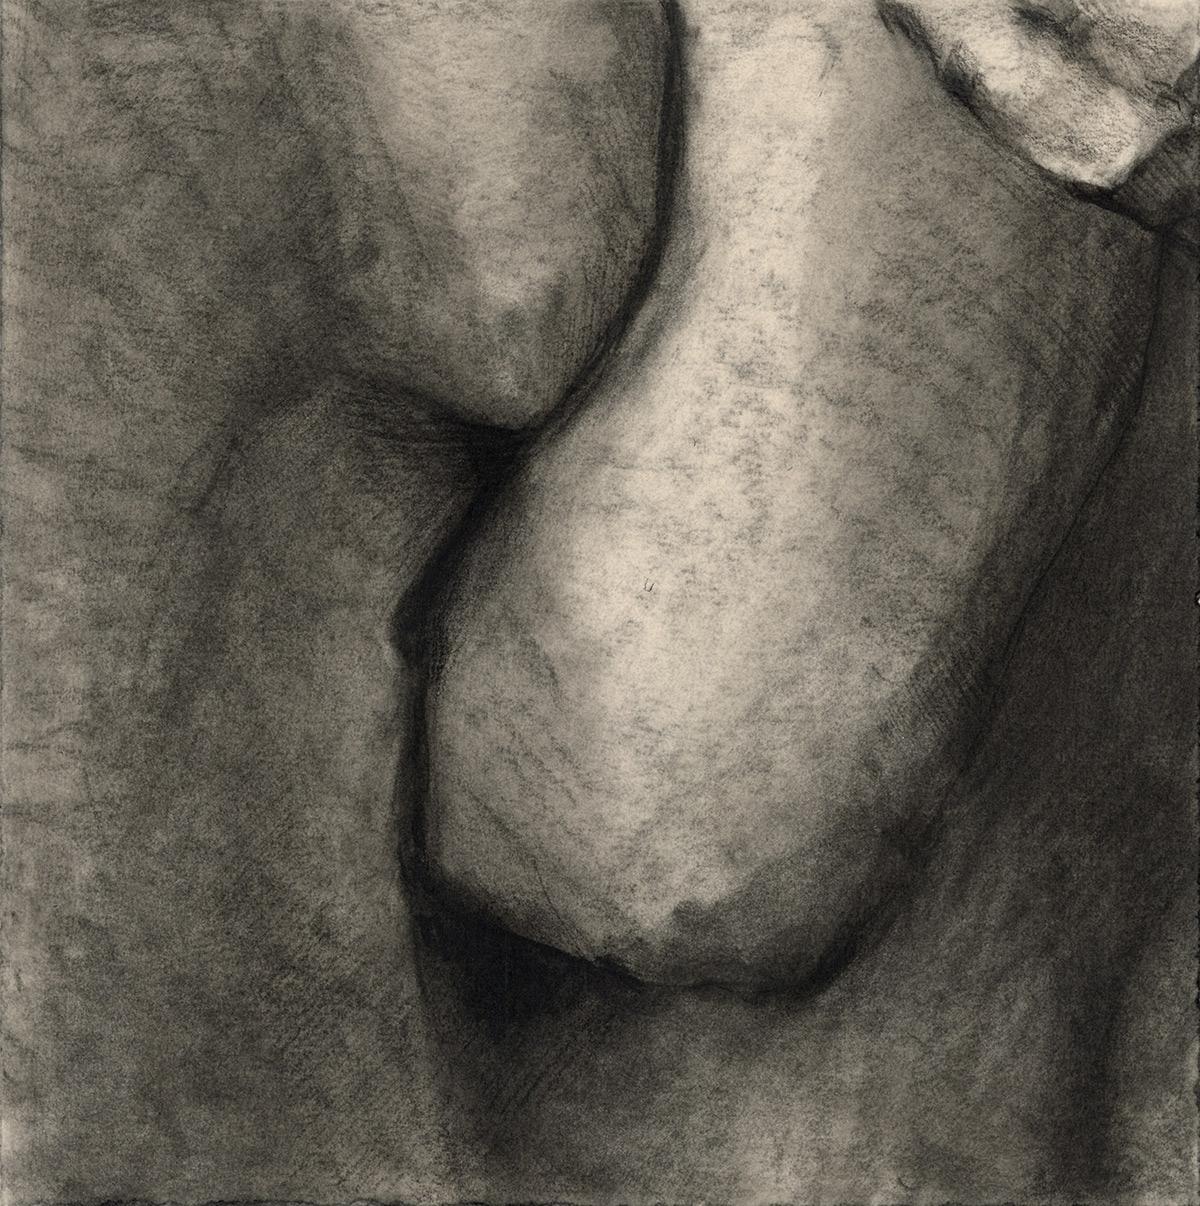 charcoal drawing suggesting a fraction of a body part